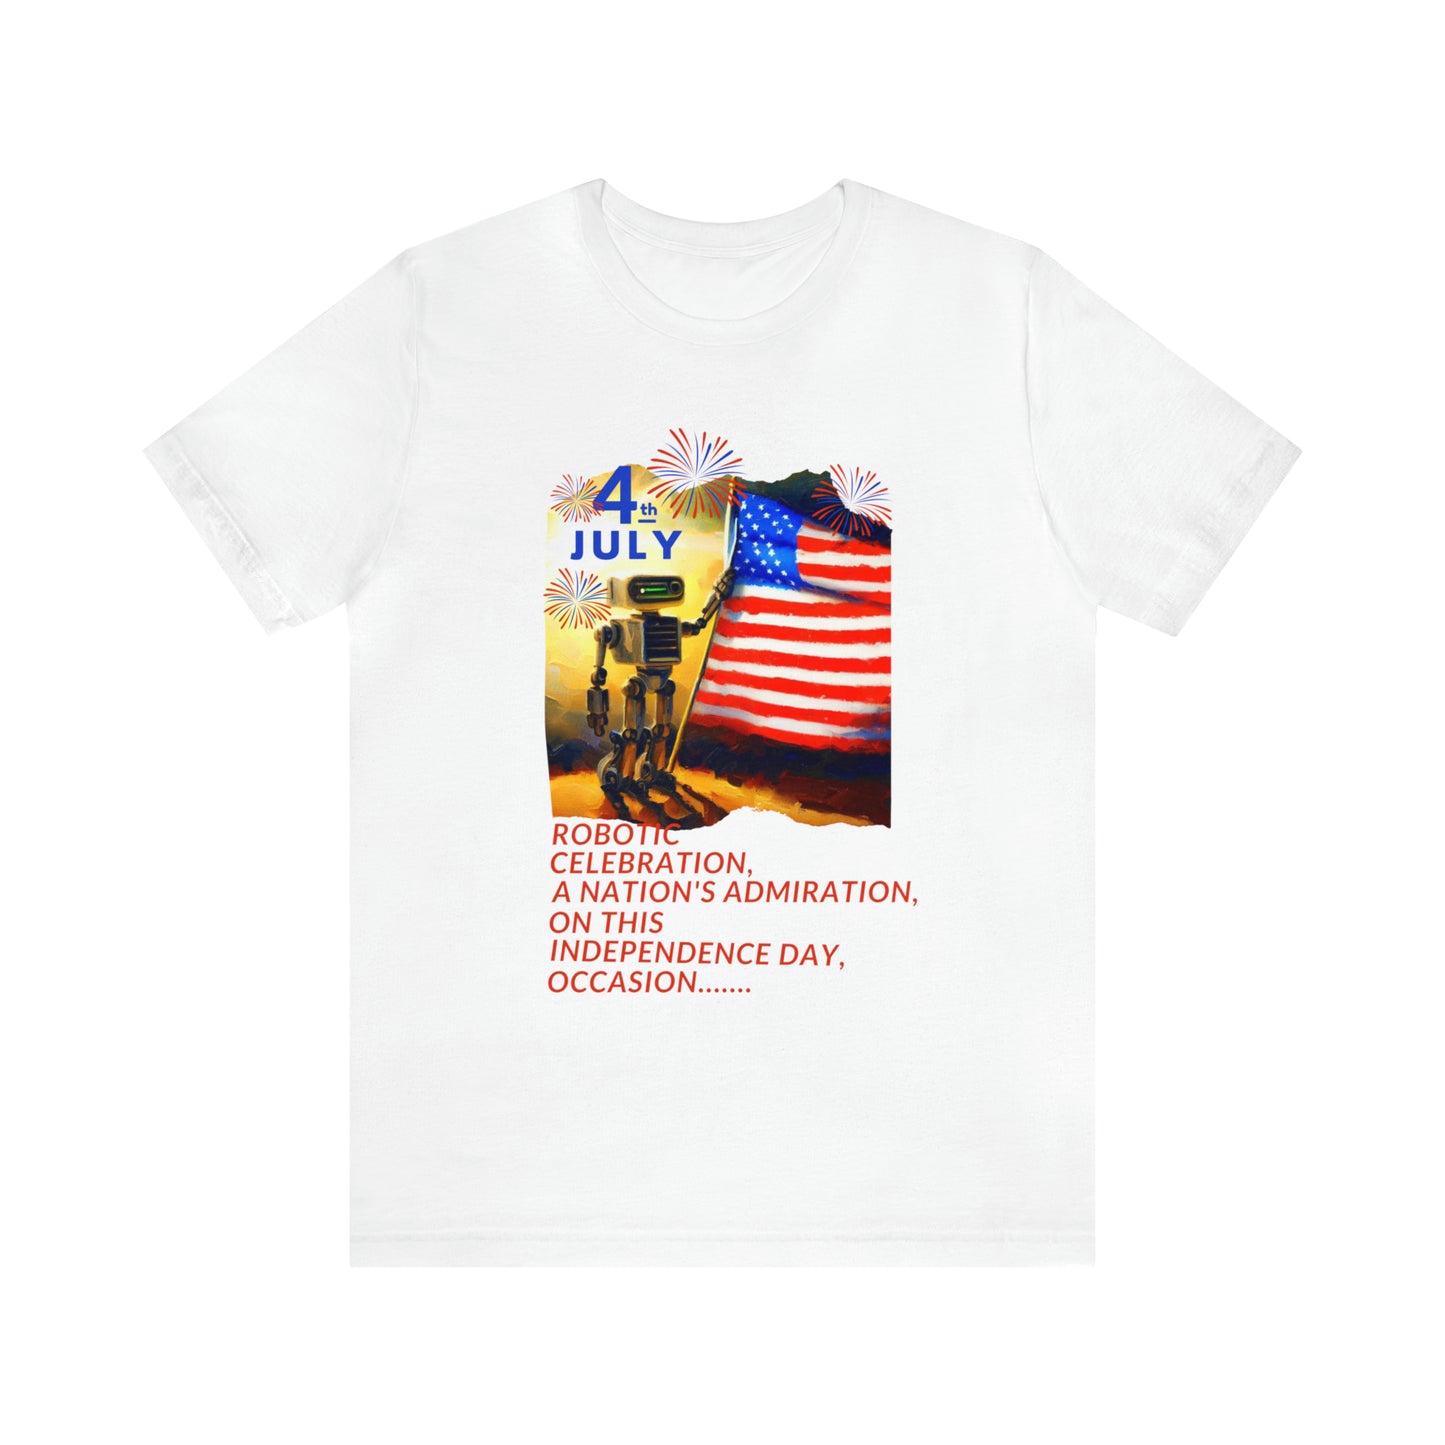 US Independence Day collection. Unisex Jersey.